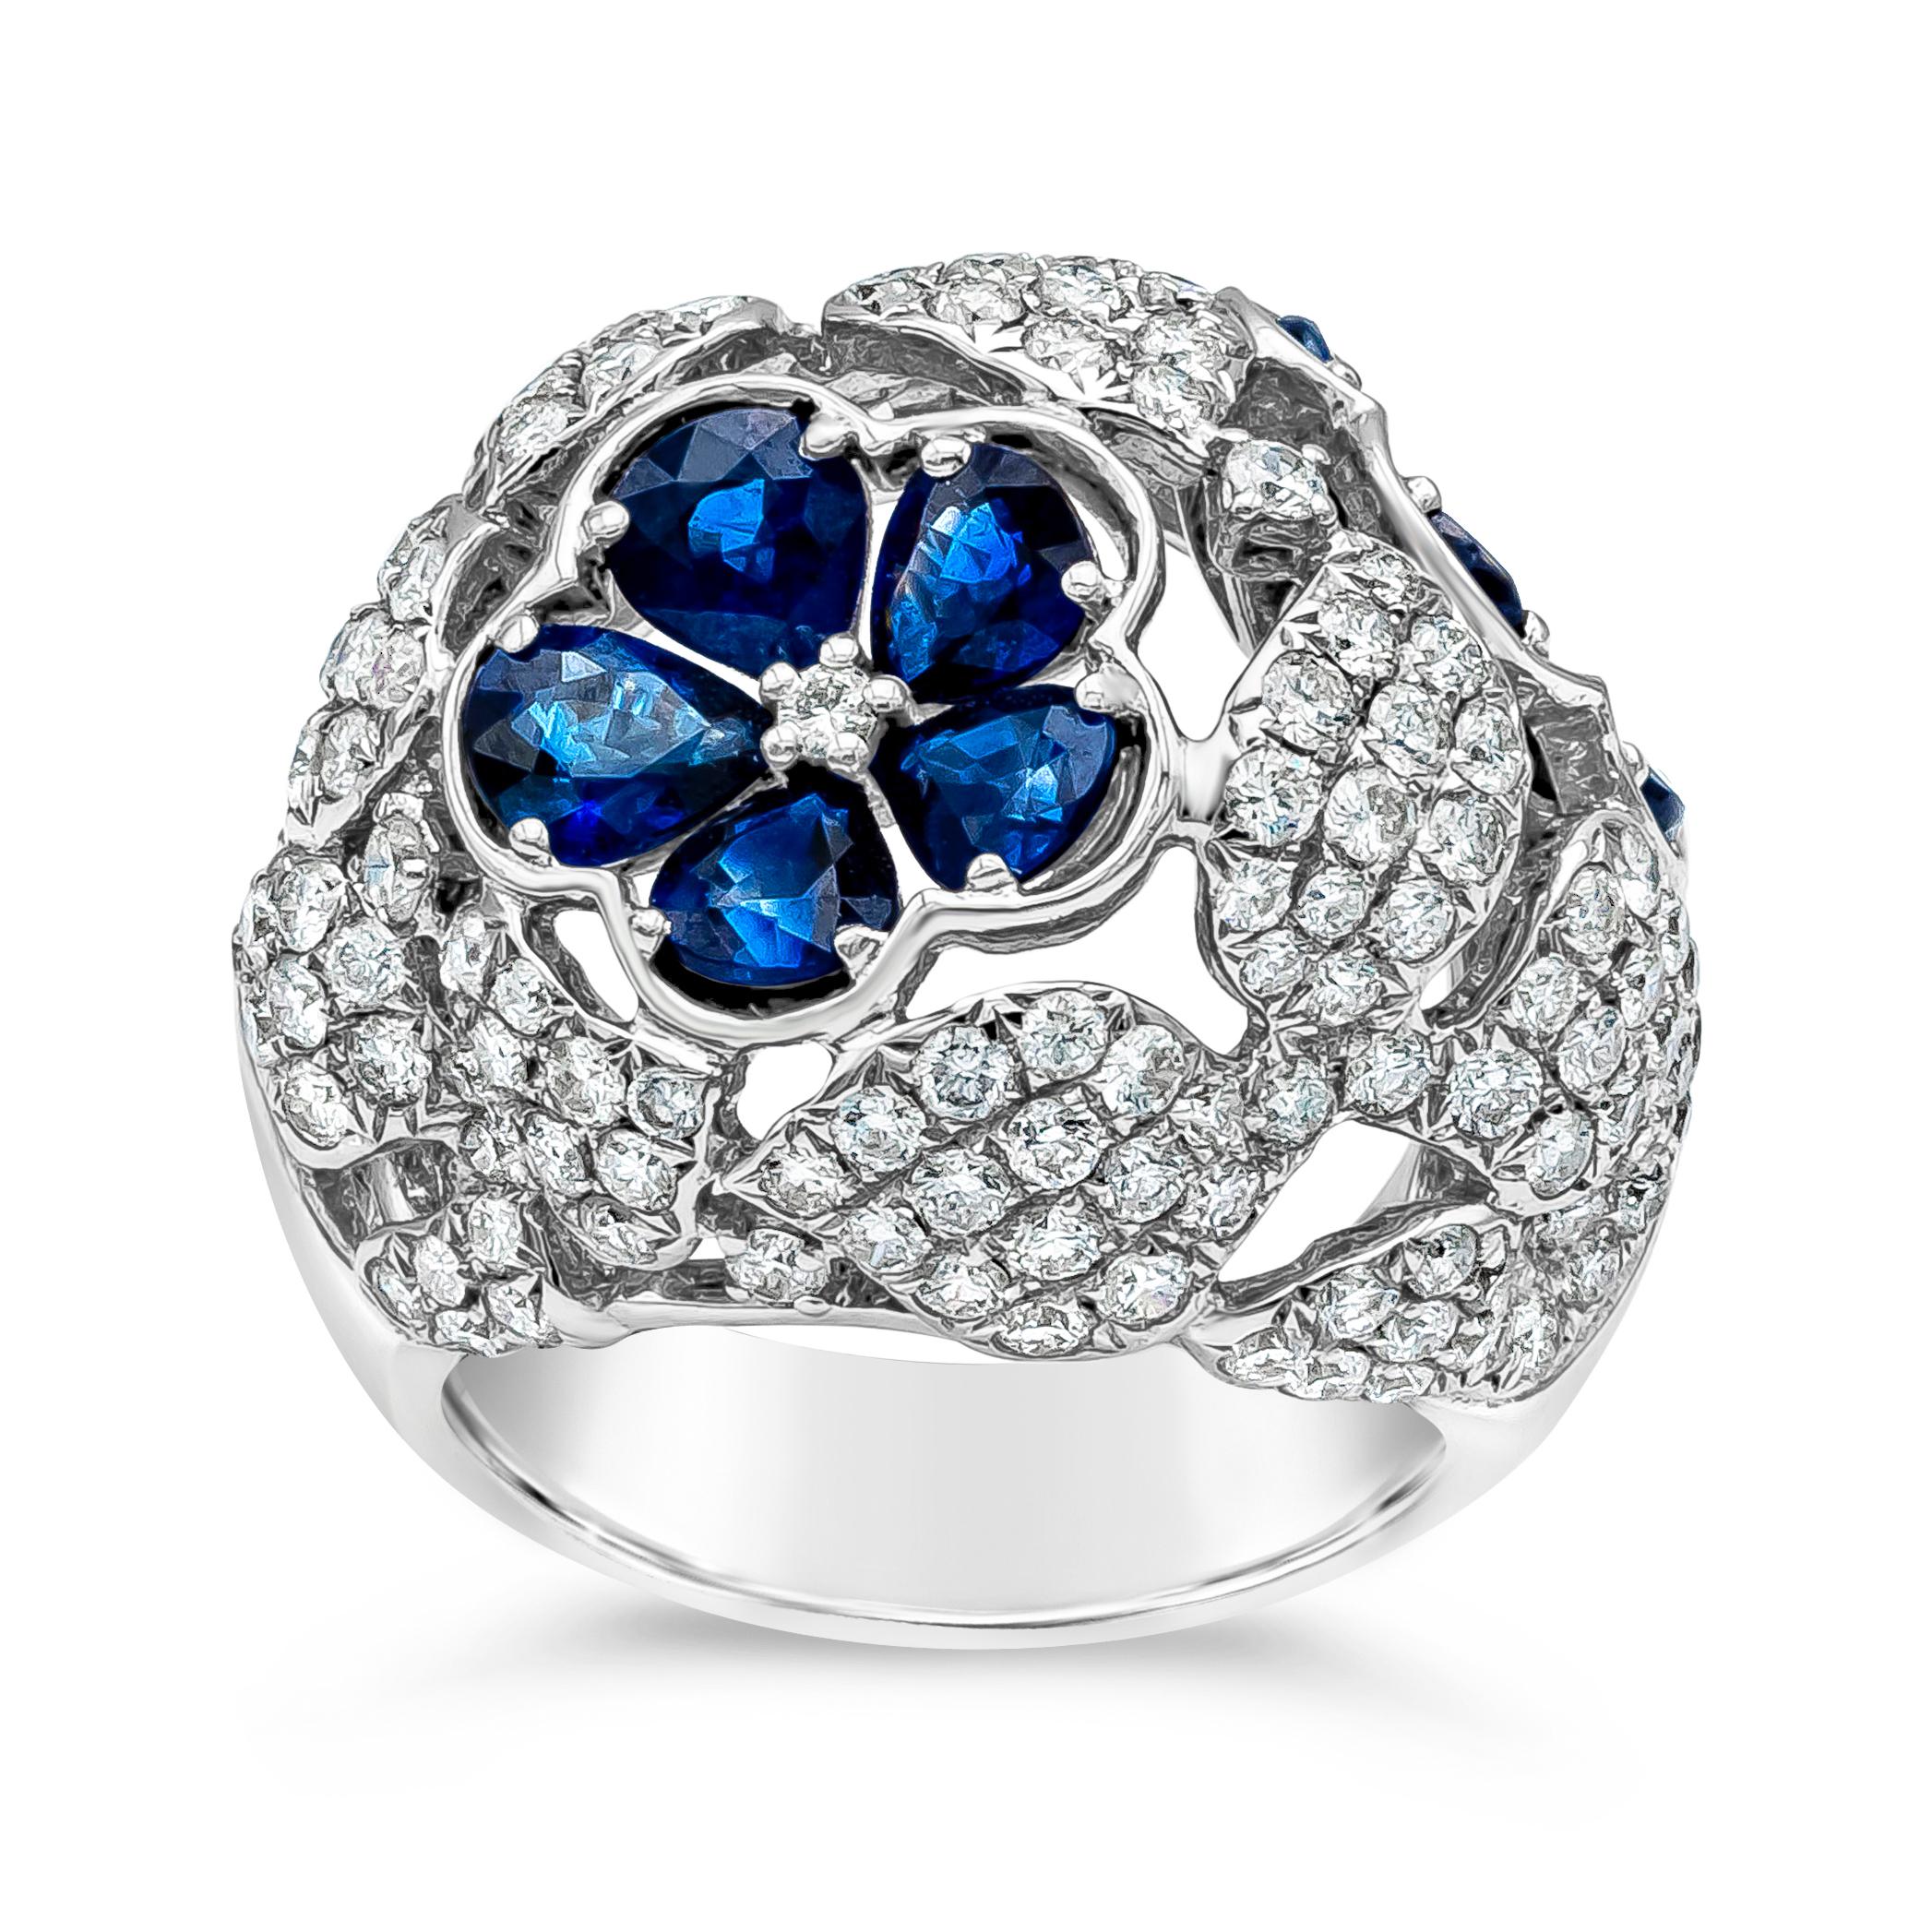 Mixed Cut Roman Malakov 8.11 Carats Total Blue Sapphire and Round Diamonds Fashion Ring For Sale